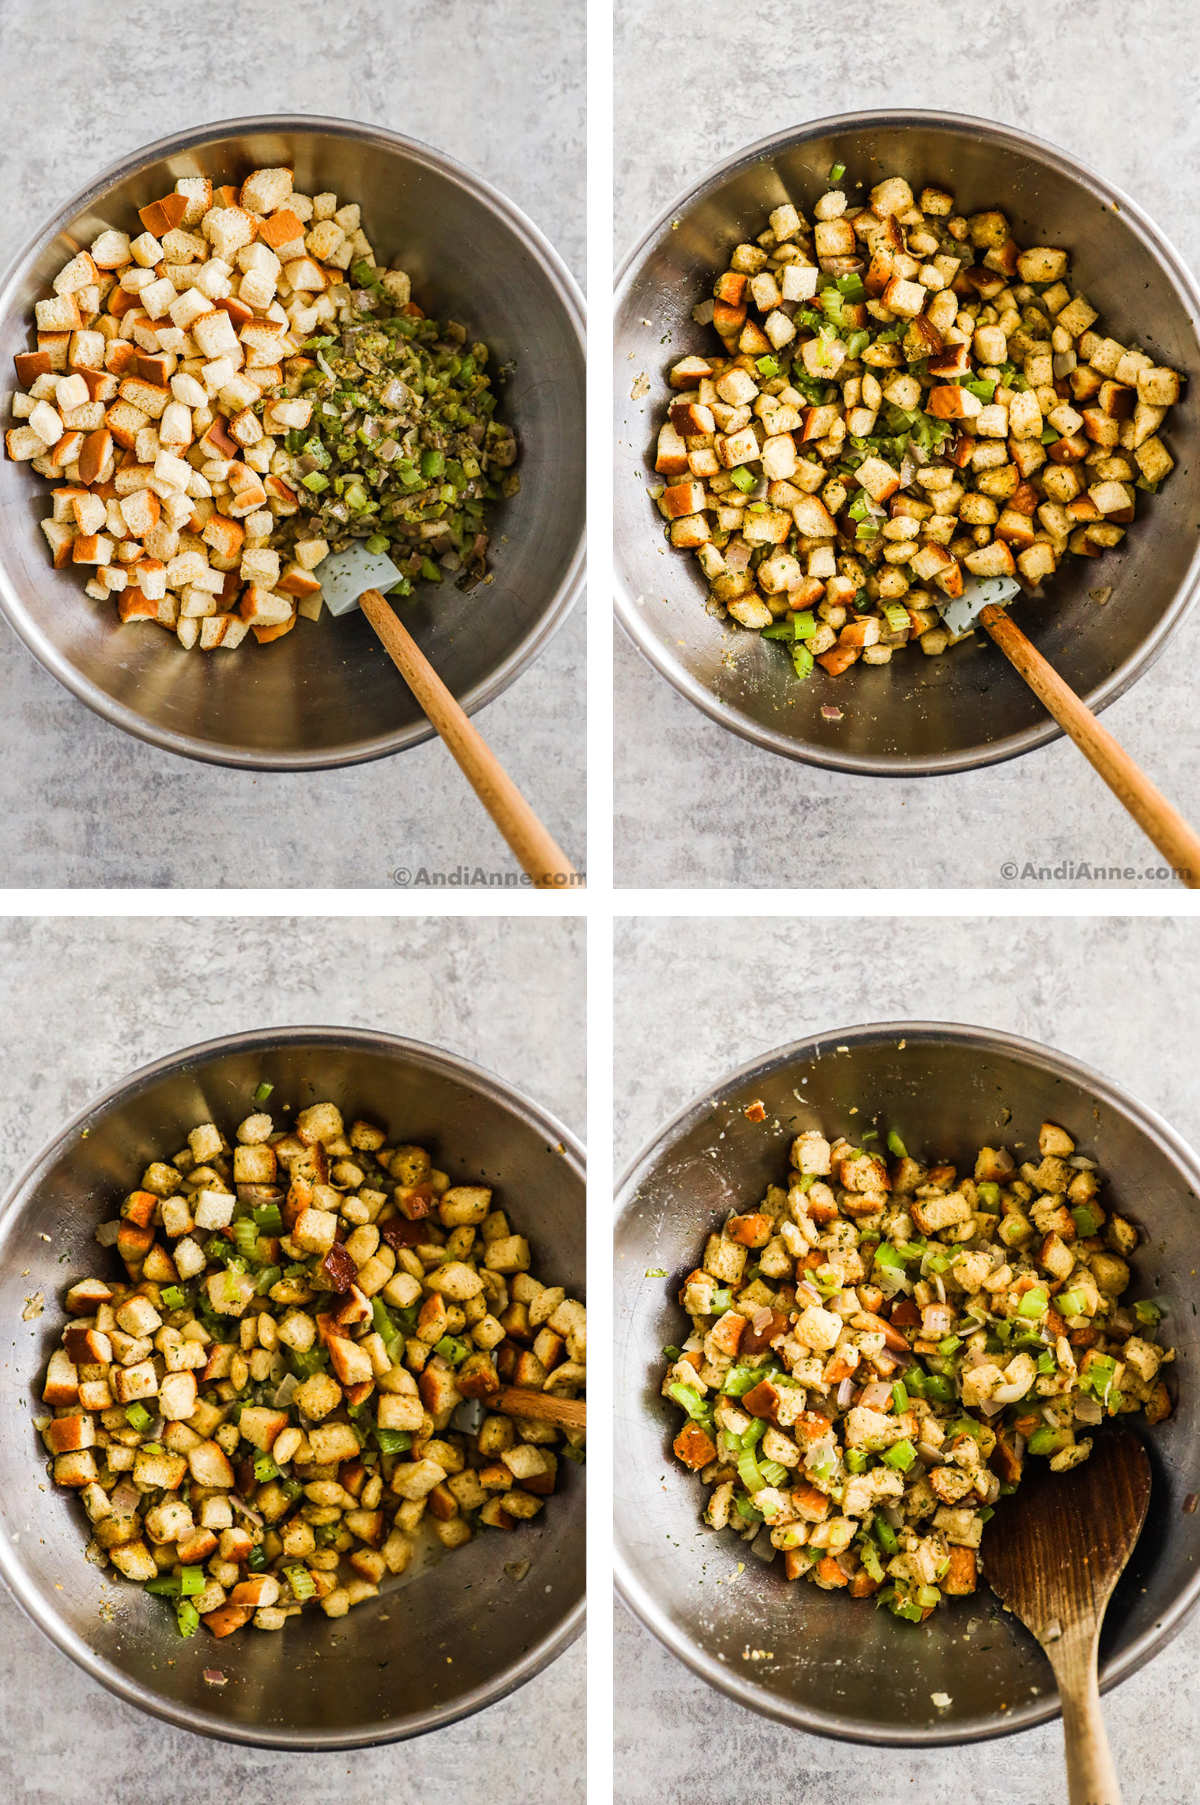 Four overhead images in one: 1. Bread cubes are added with vegetables and spices in a steel bowl. 2. Ingredients are mixed. 3. Egg mixture is added. 4. Ingredients are mixed. 